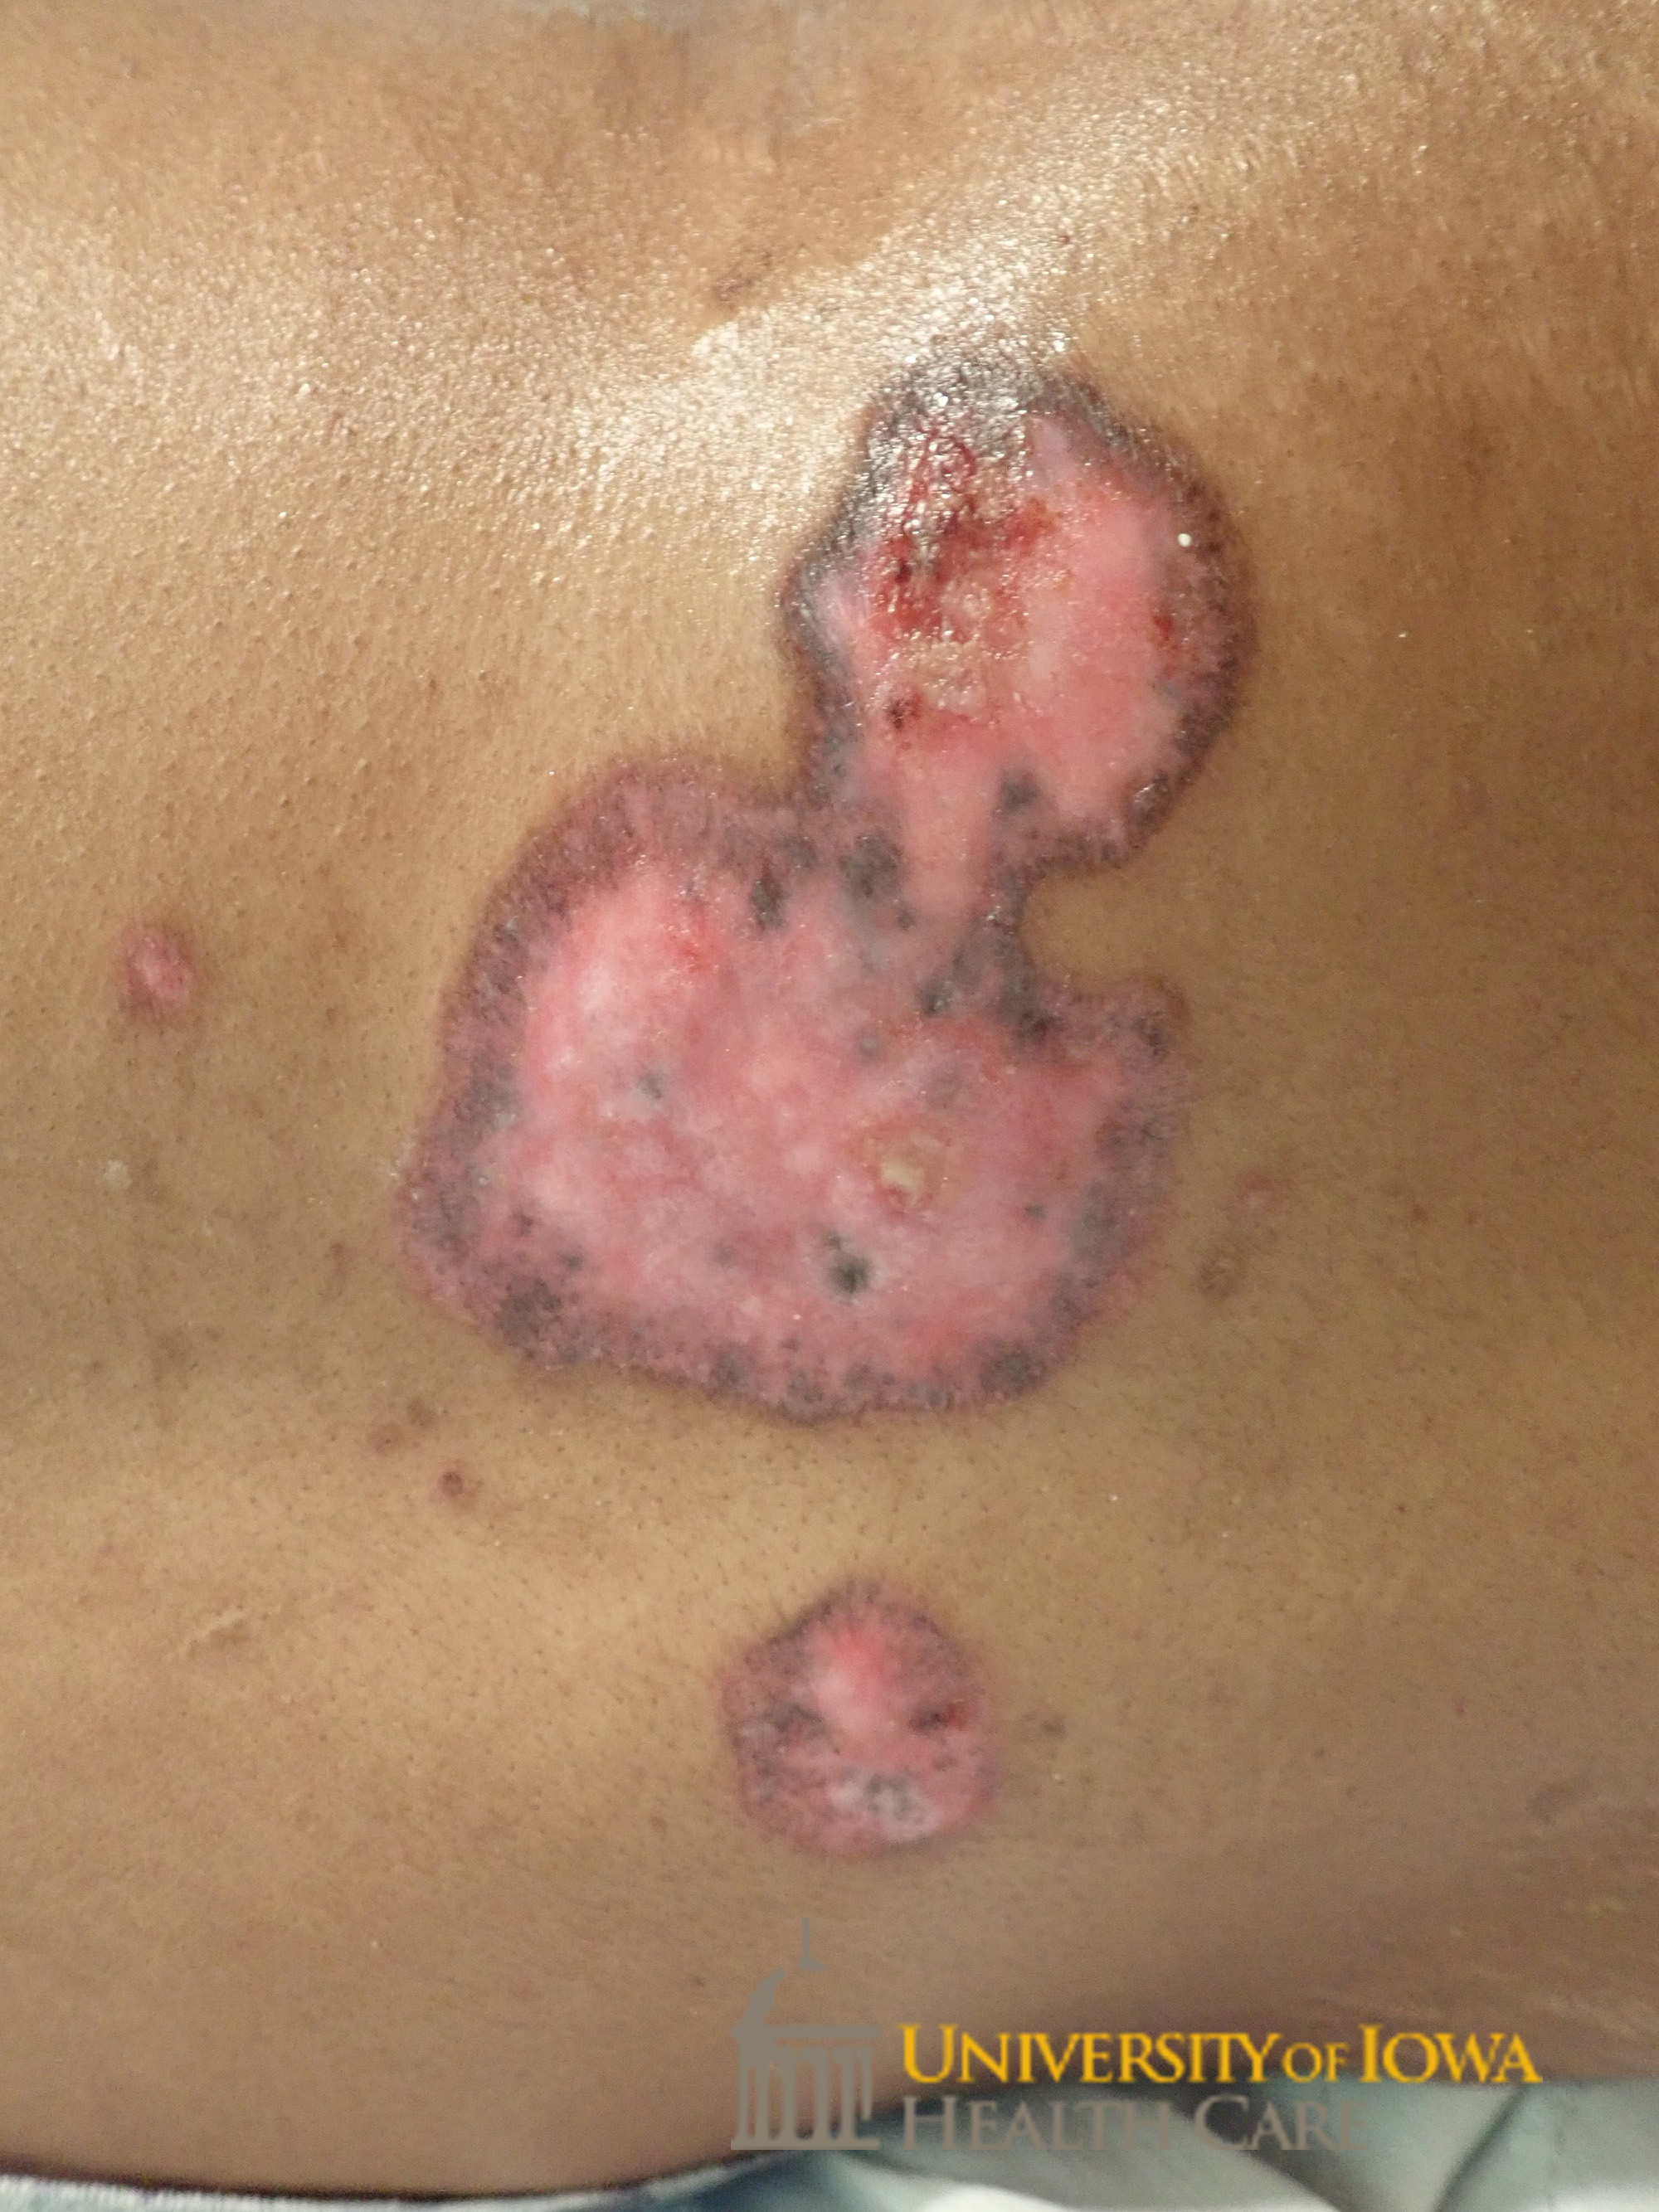 Well demaracated, shiny, and atrophic plaque with rim of hyperpigmentation and focal area of heme-crust. (click images for higher resolution).